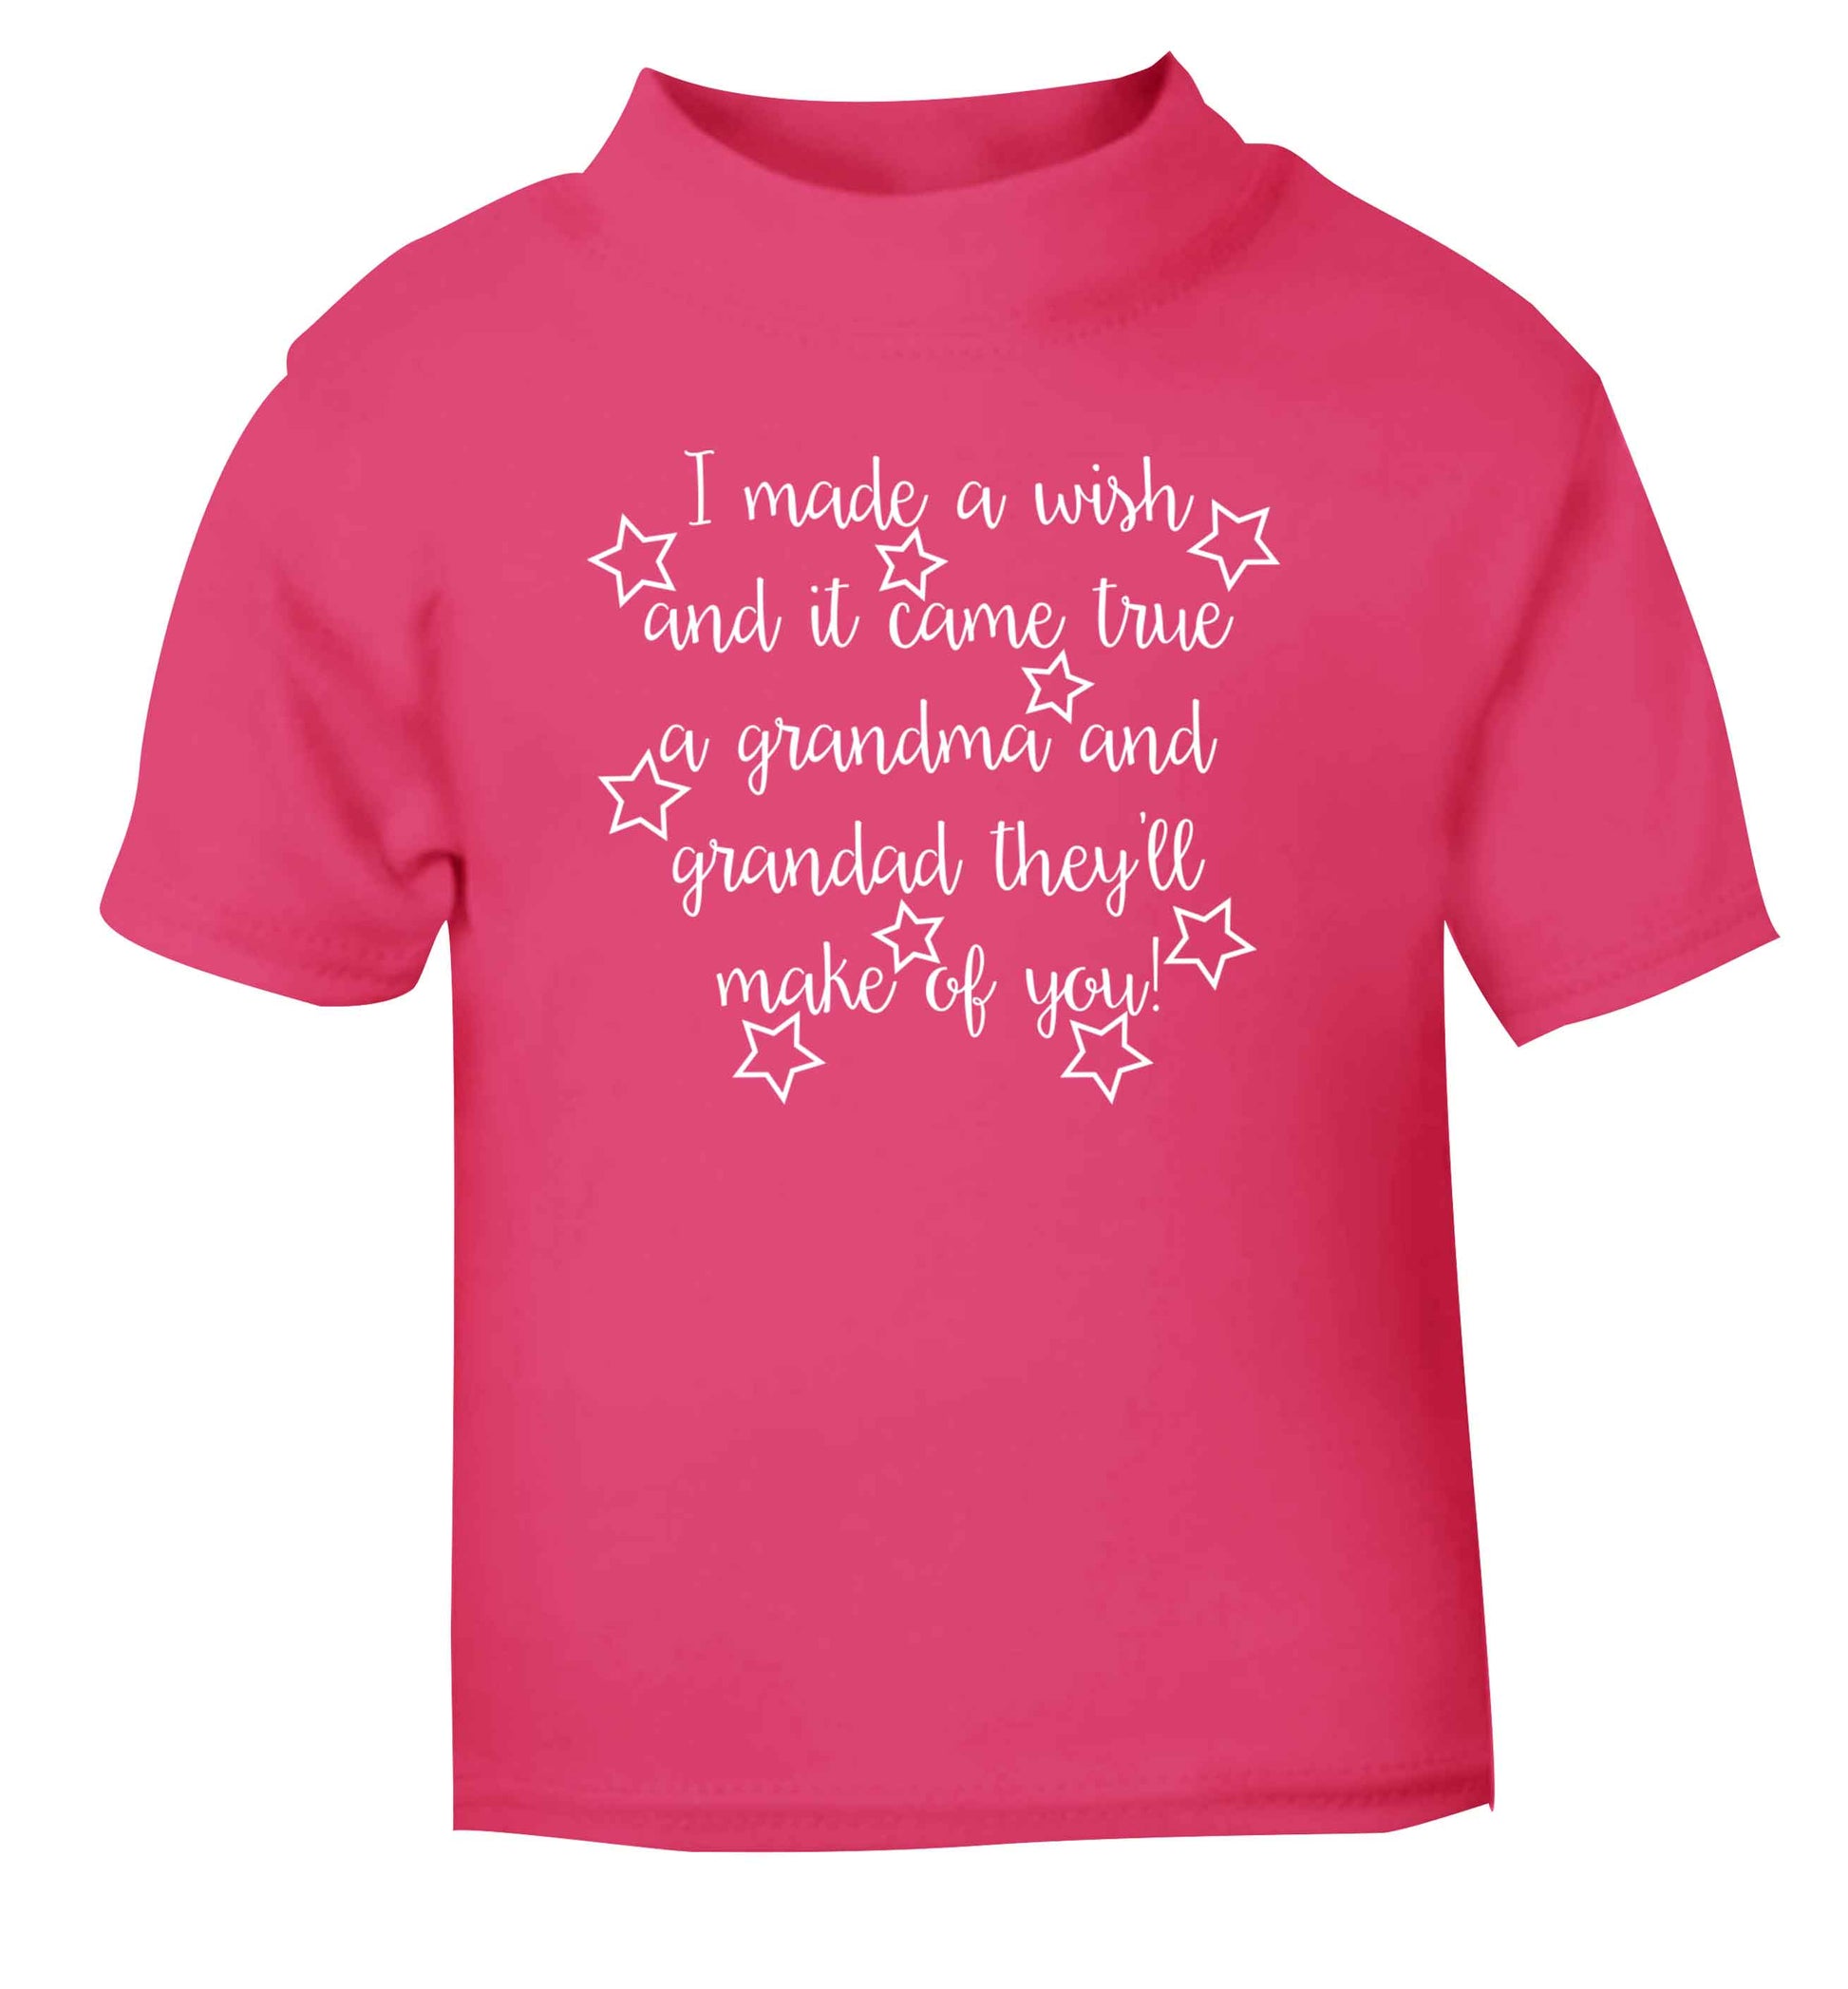 I made a wish and it came true a grandma and grandad they'll make of you! pink Baby Toddler Tshirt 2 Years